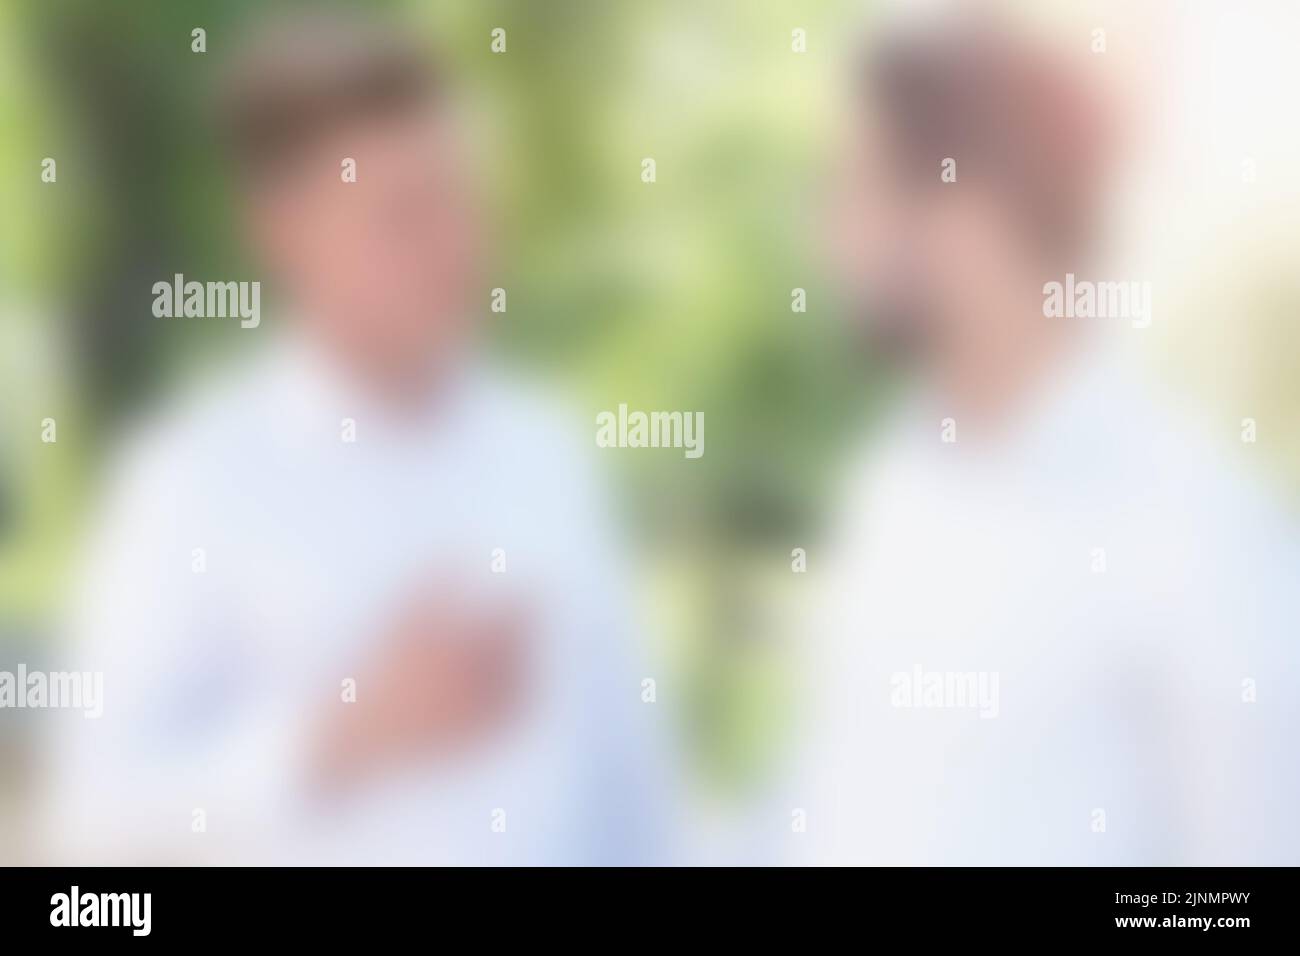 blurry background of two young men having a conversation Stock Photo